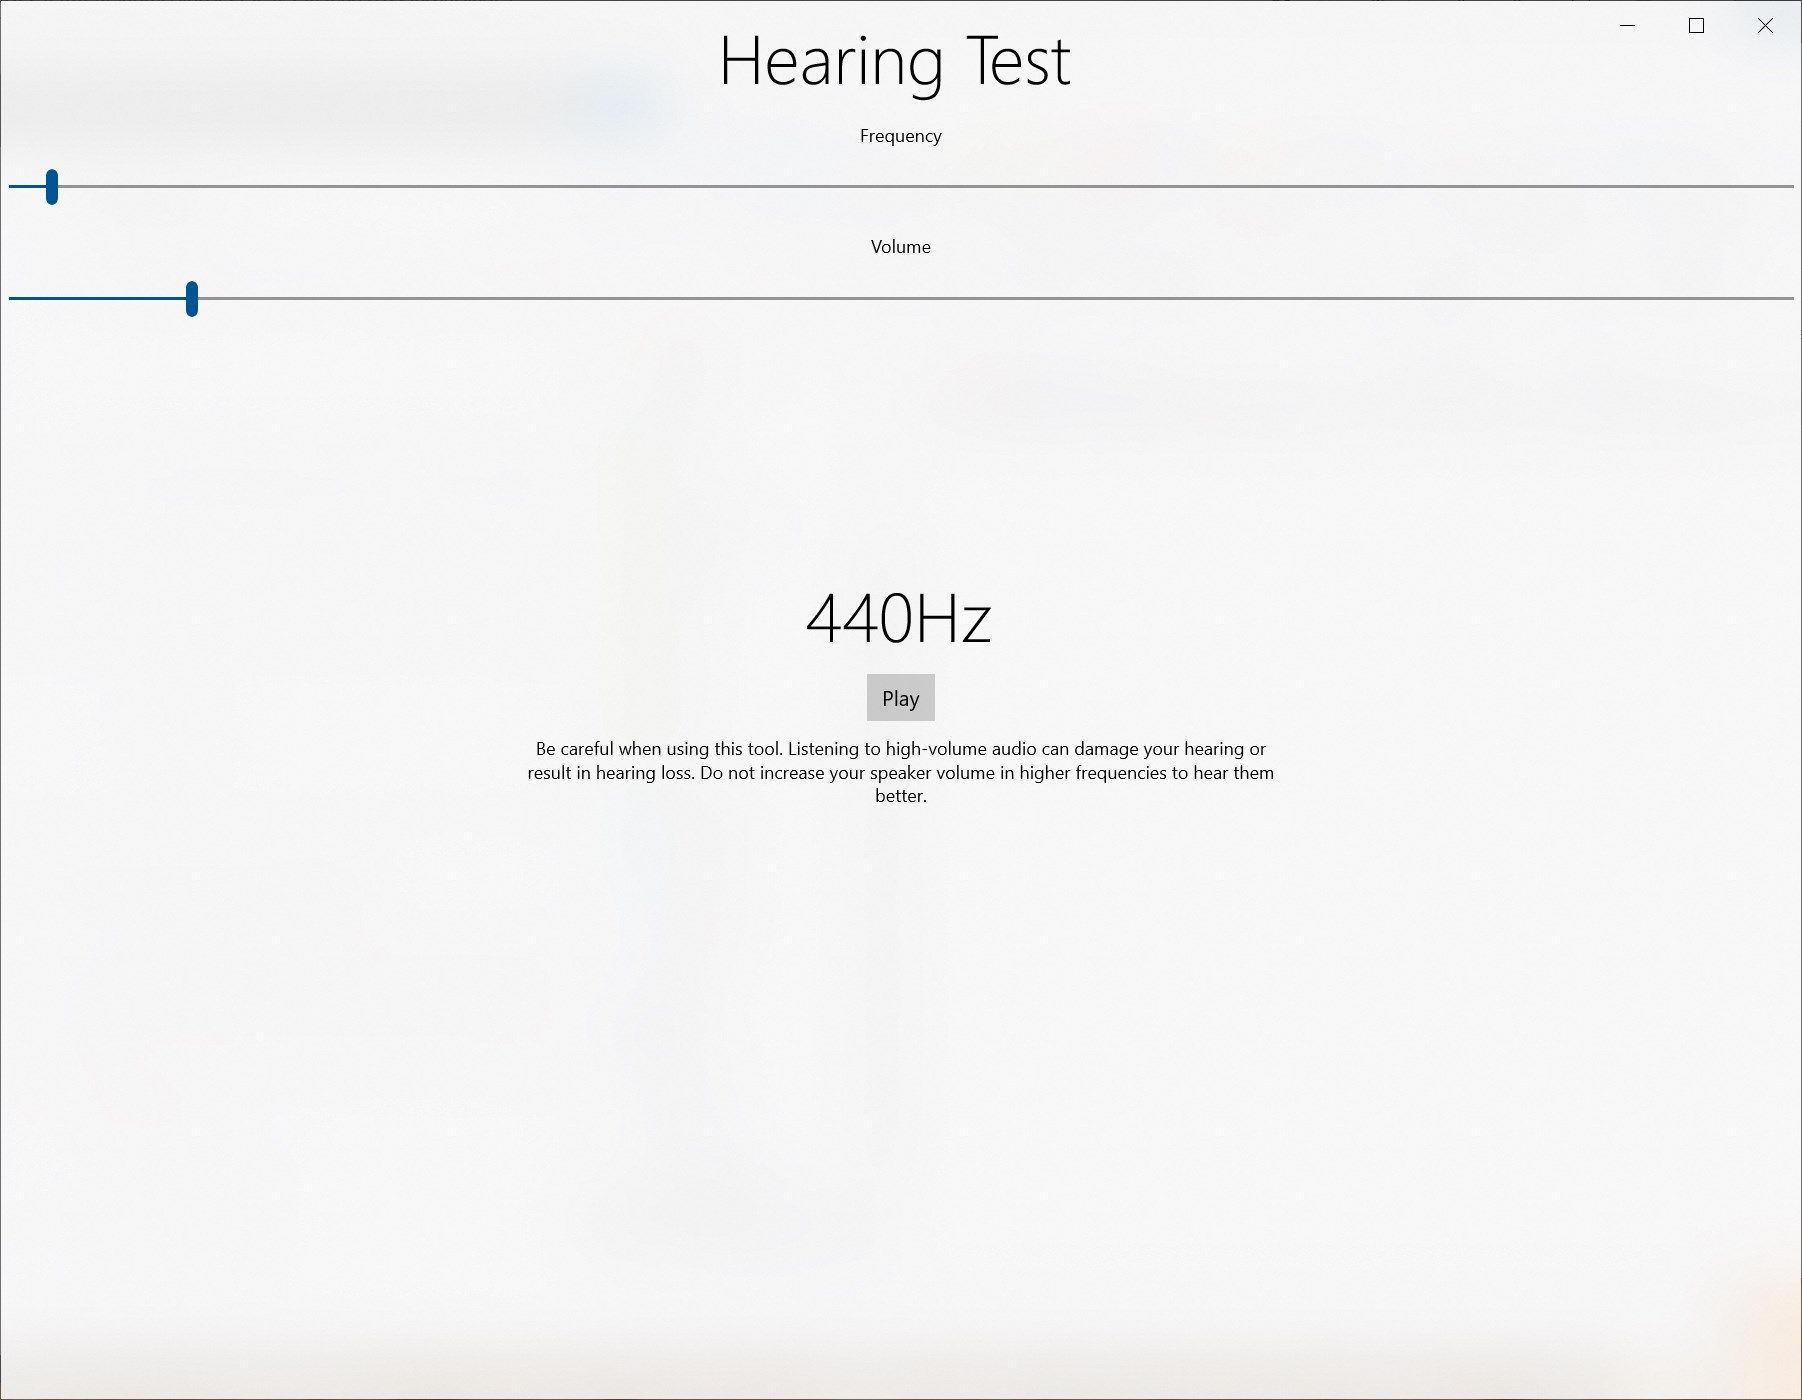 Simple Hearing Test